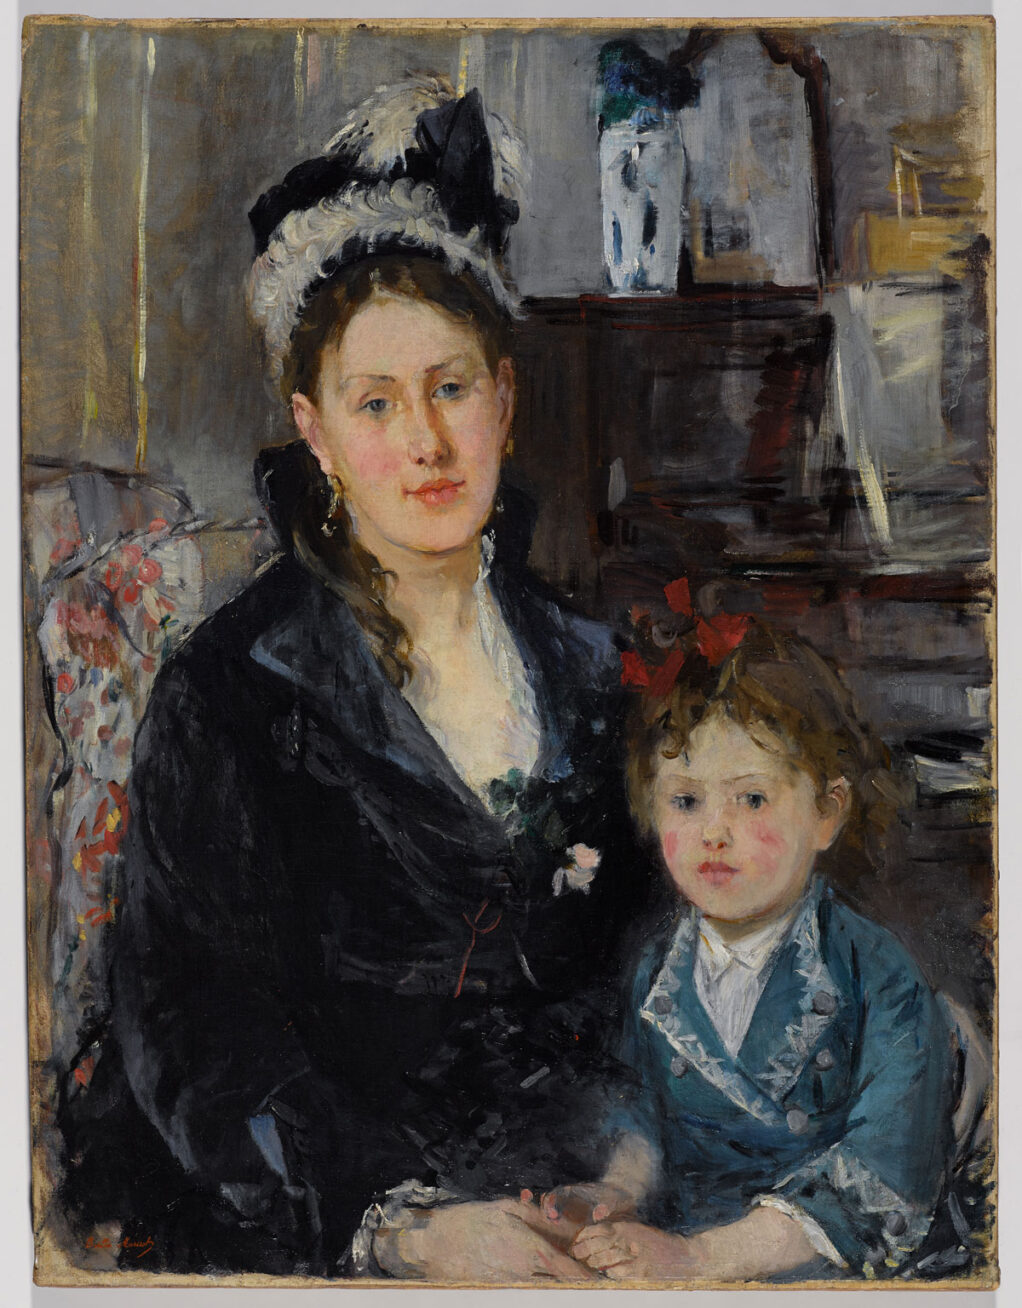 Painting of a woman and her child